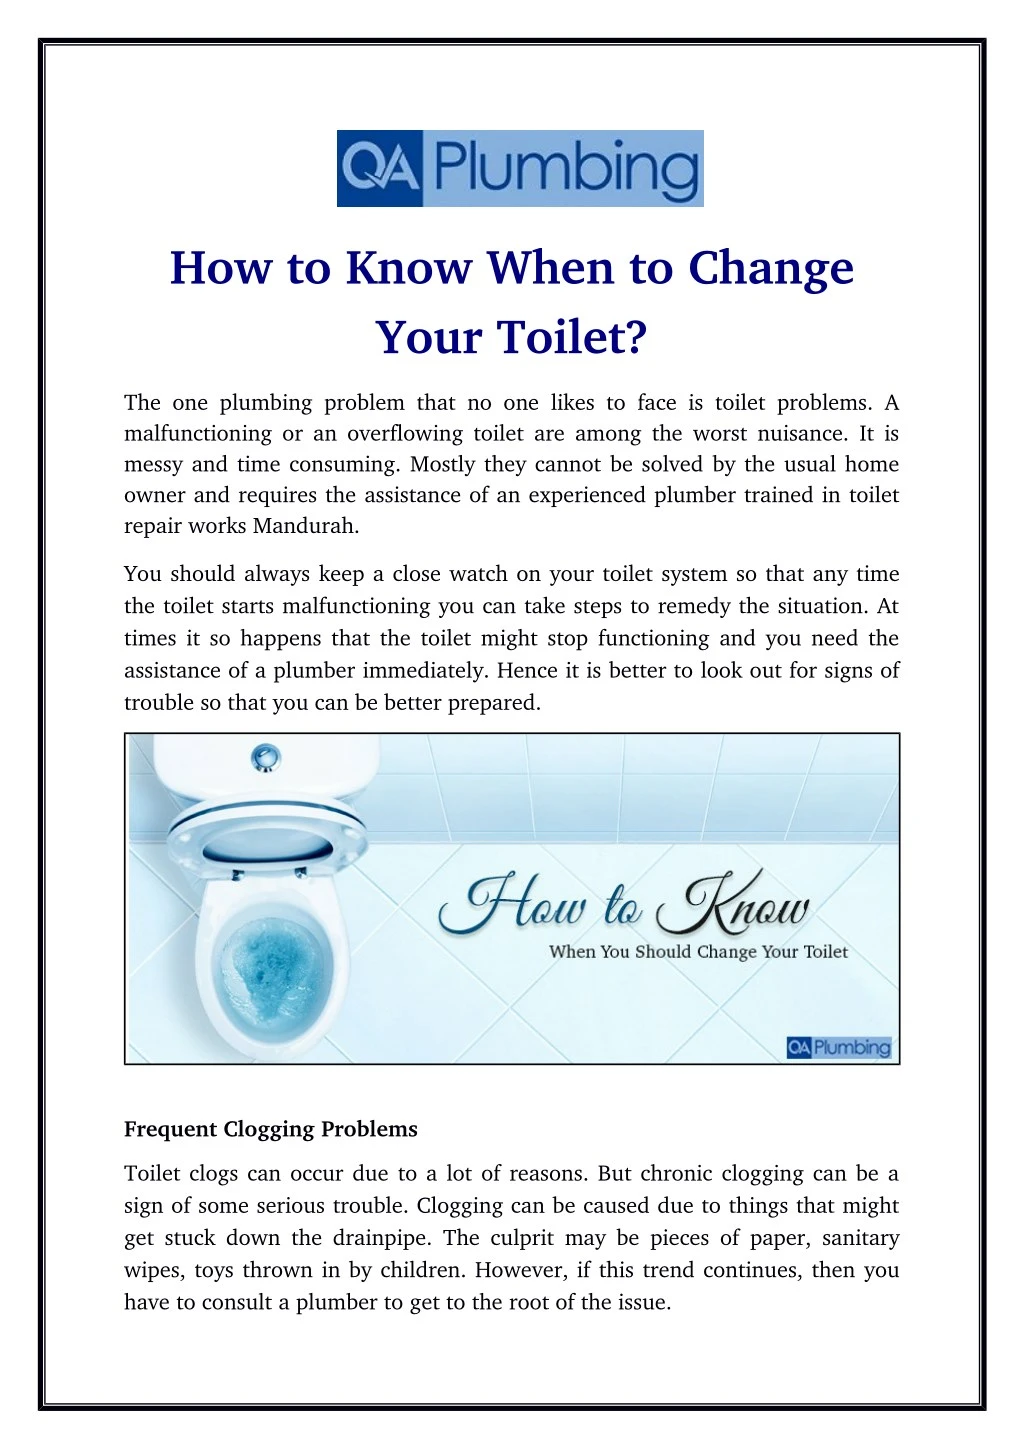 how to know when to change your toilet